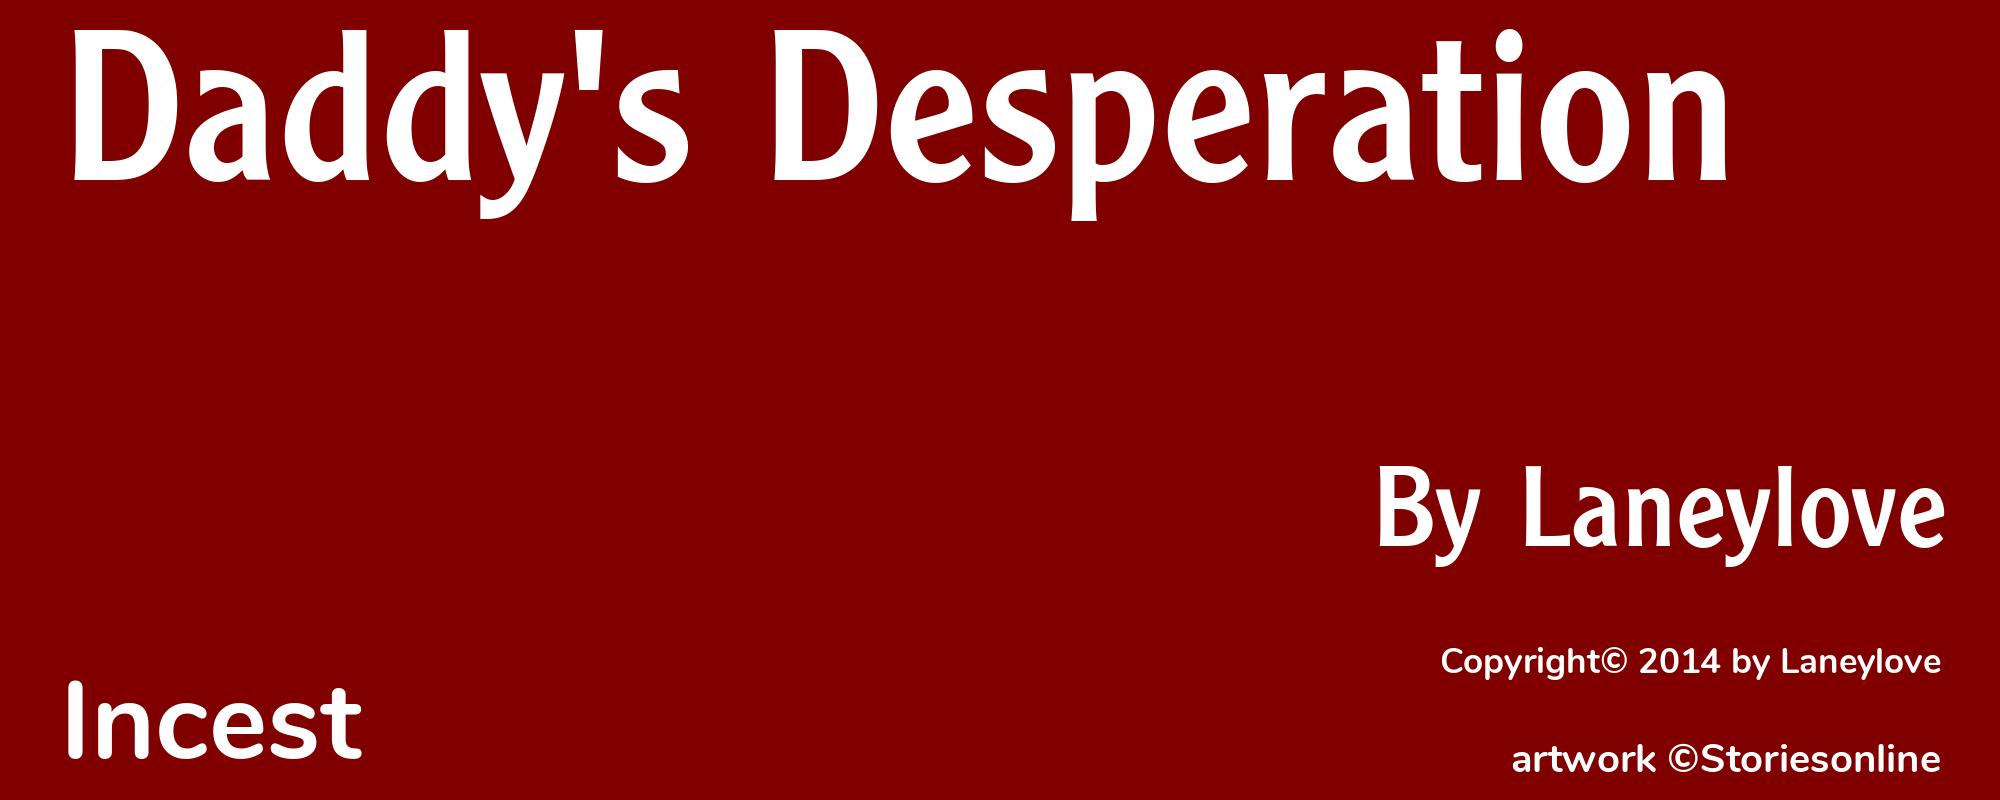 Daddy's Desperation - Cover